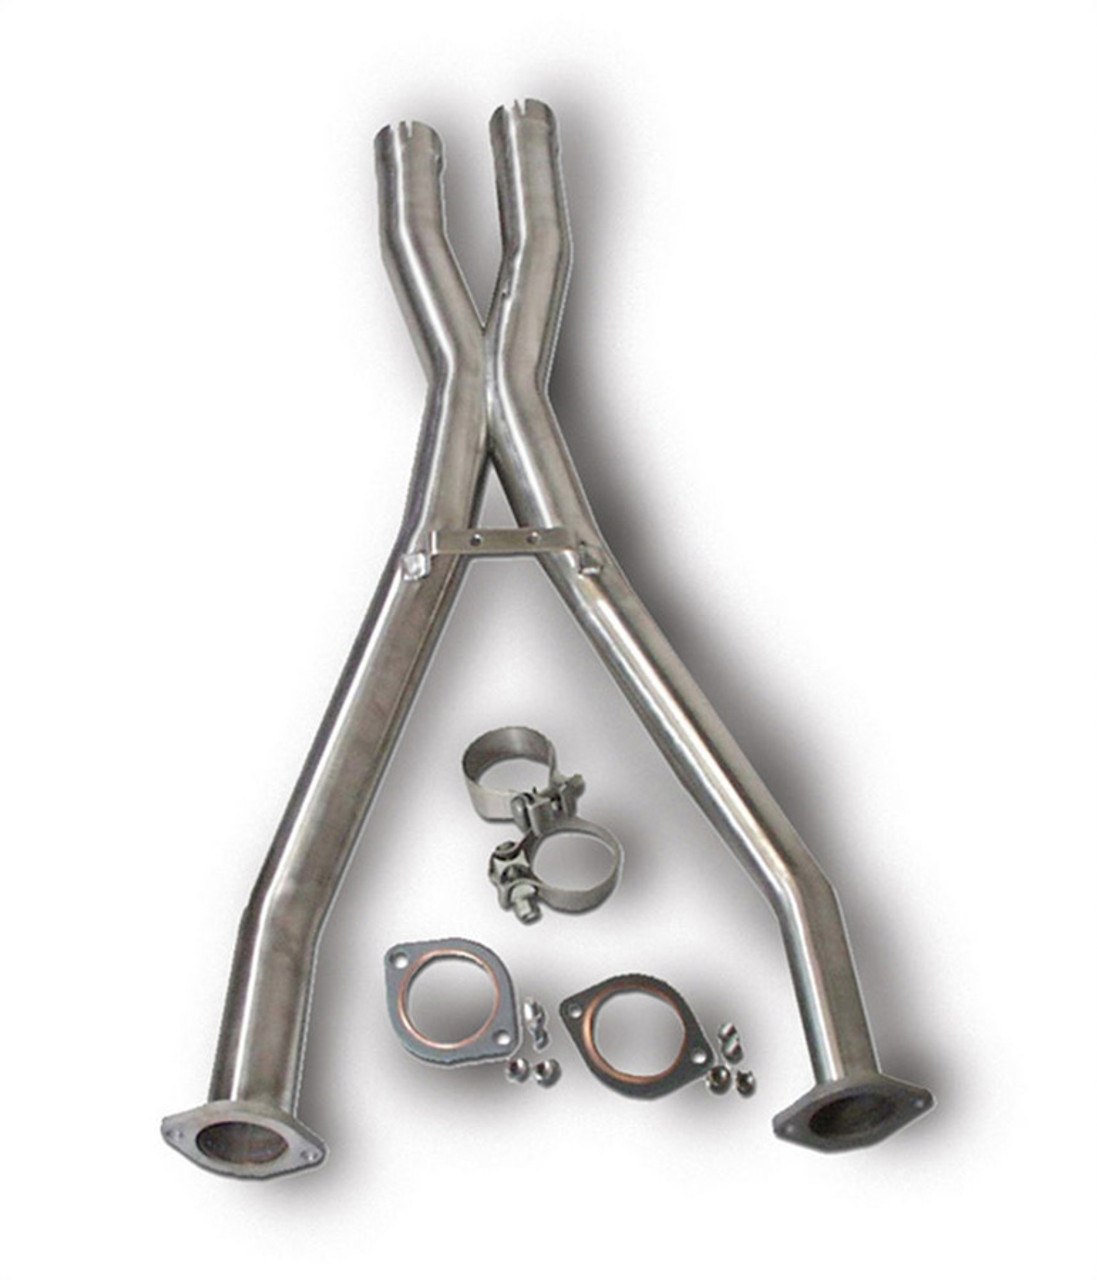 Corsa Crossover X Pipe 2.5in 16 Gauge Stainless Steel - COR14131